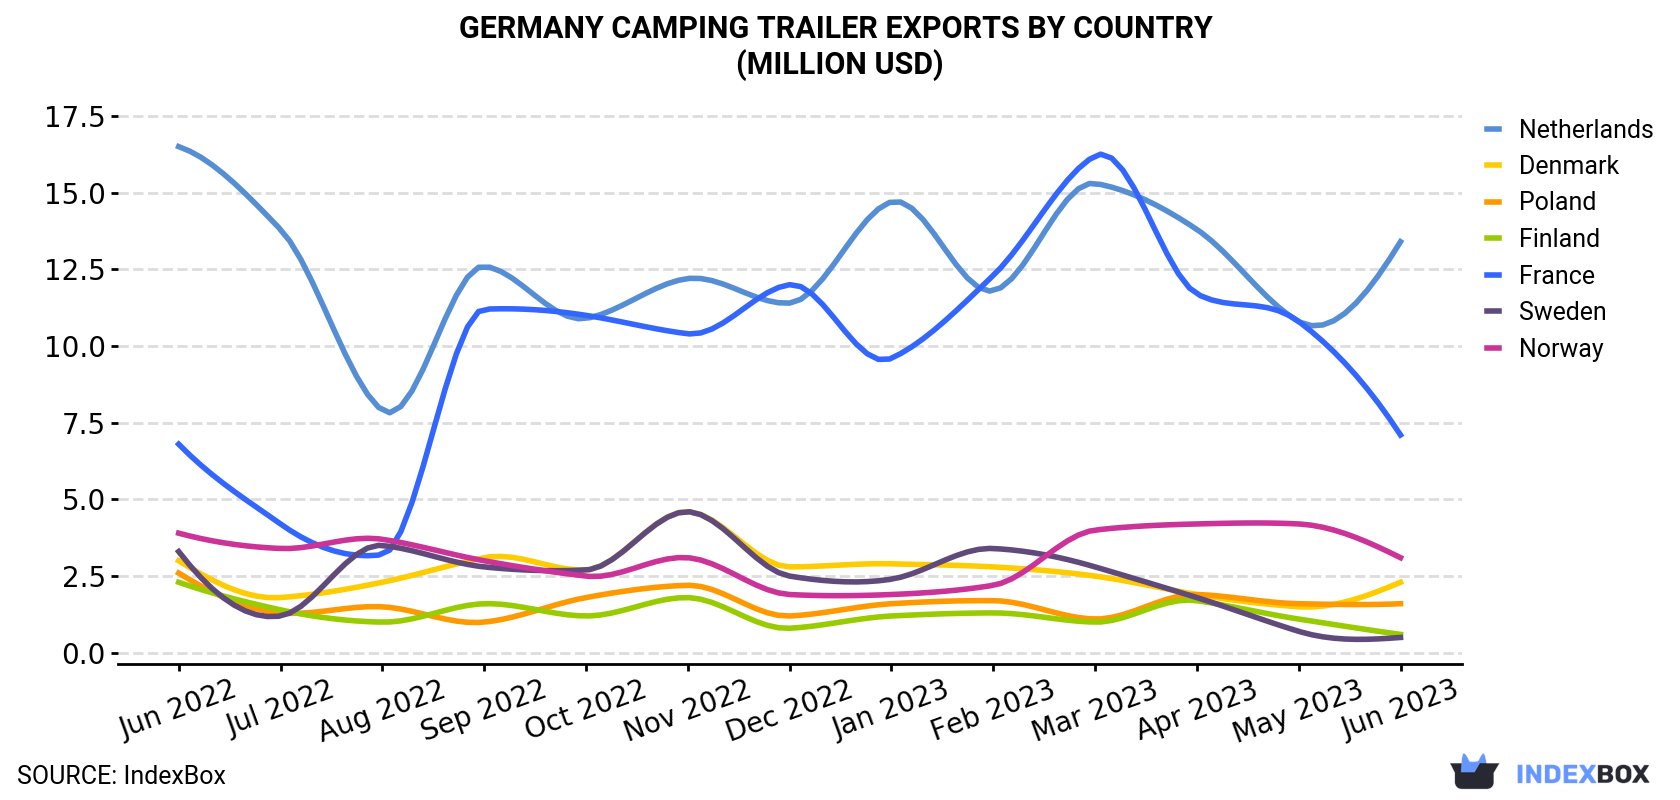 Germany Camping Trailer Exports By Country (Million USD)